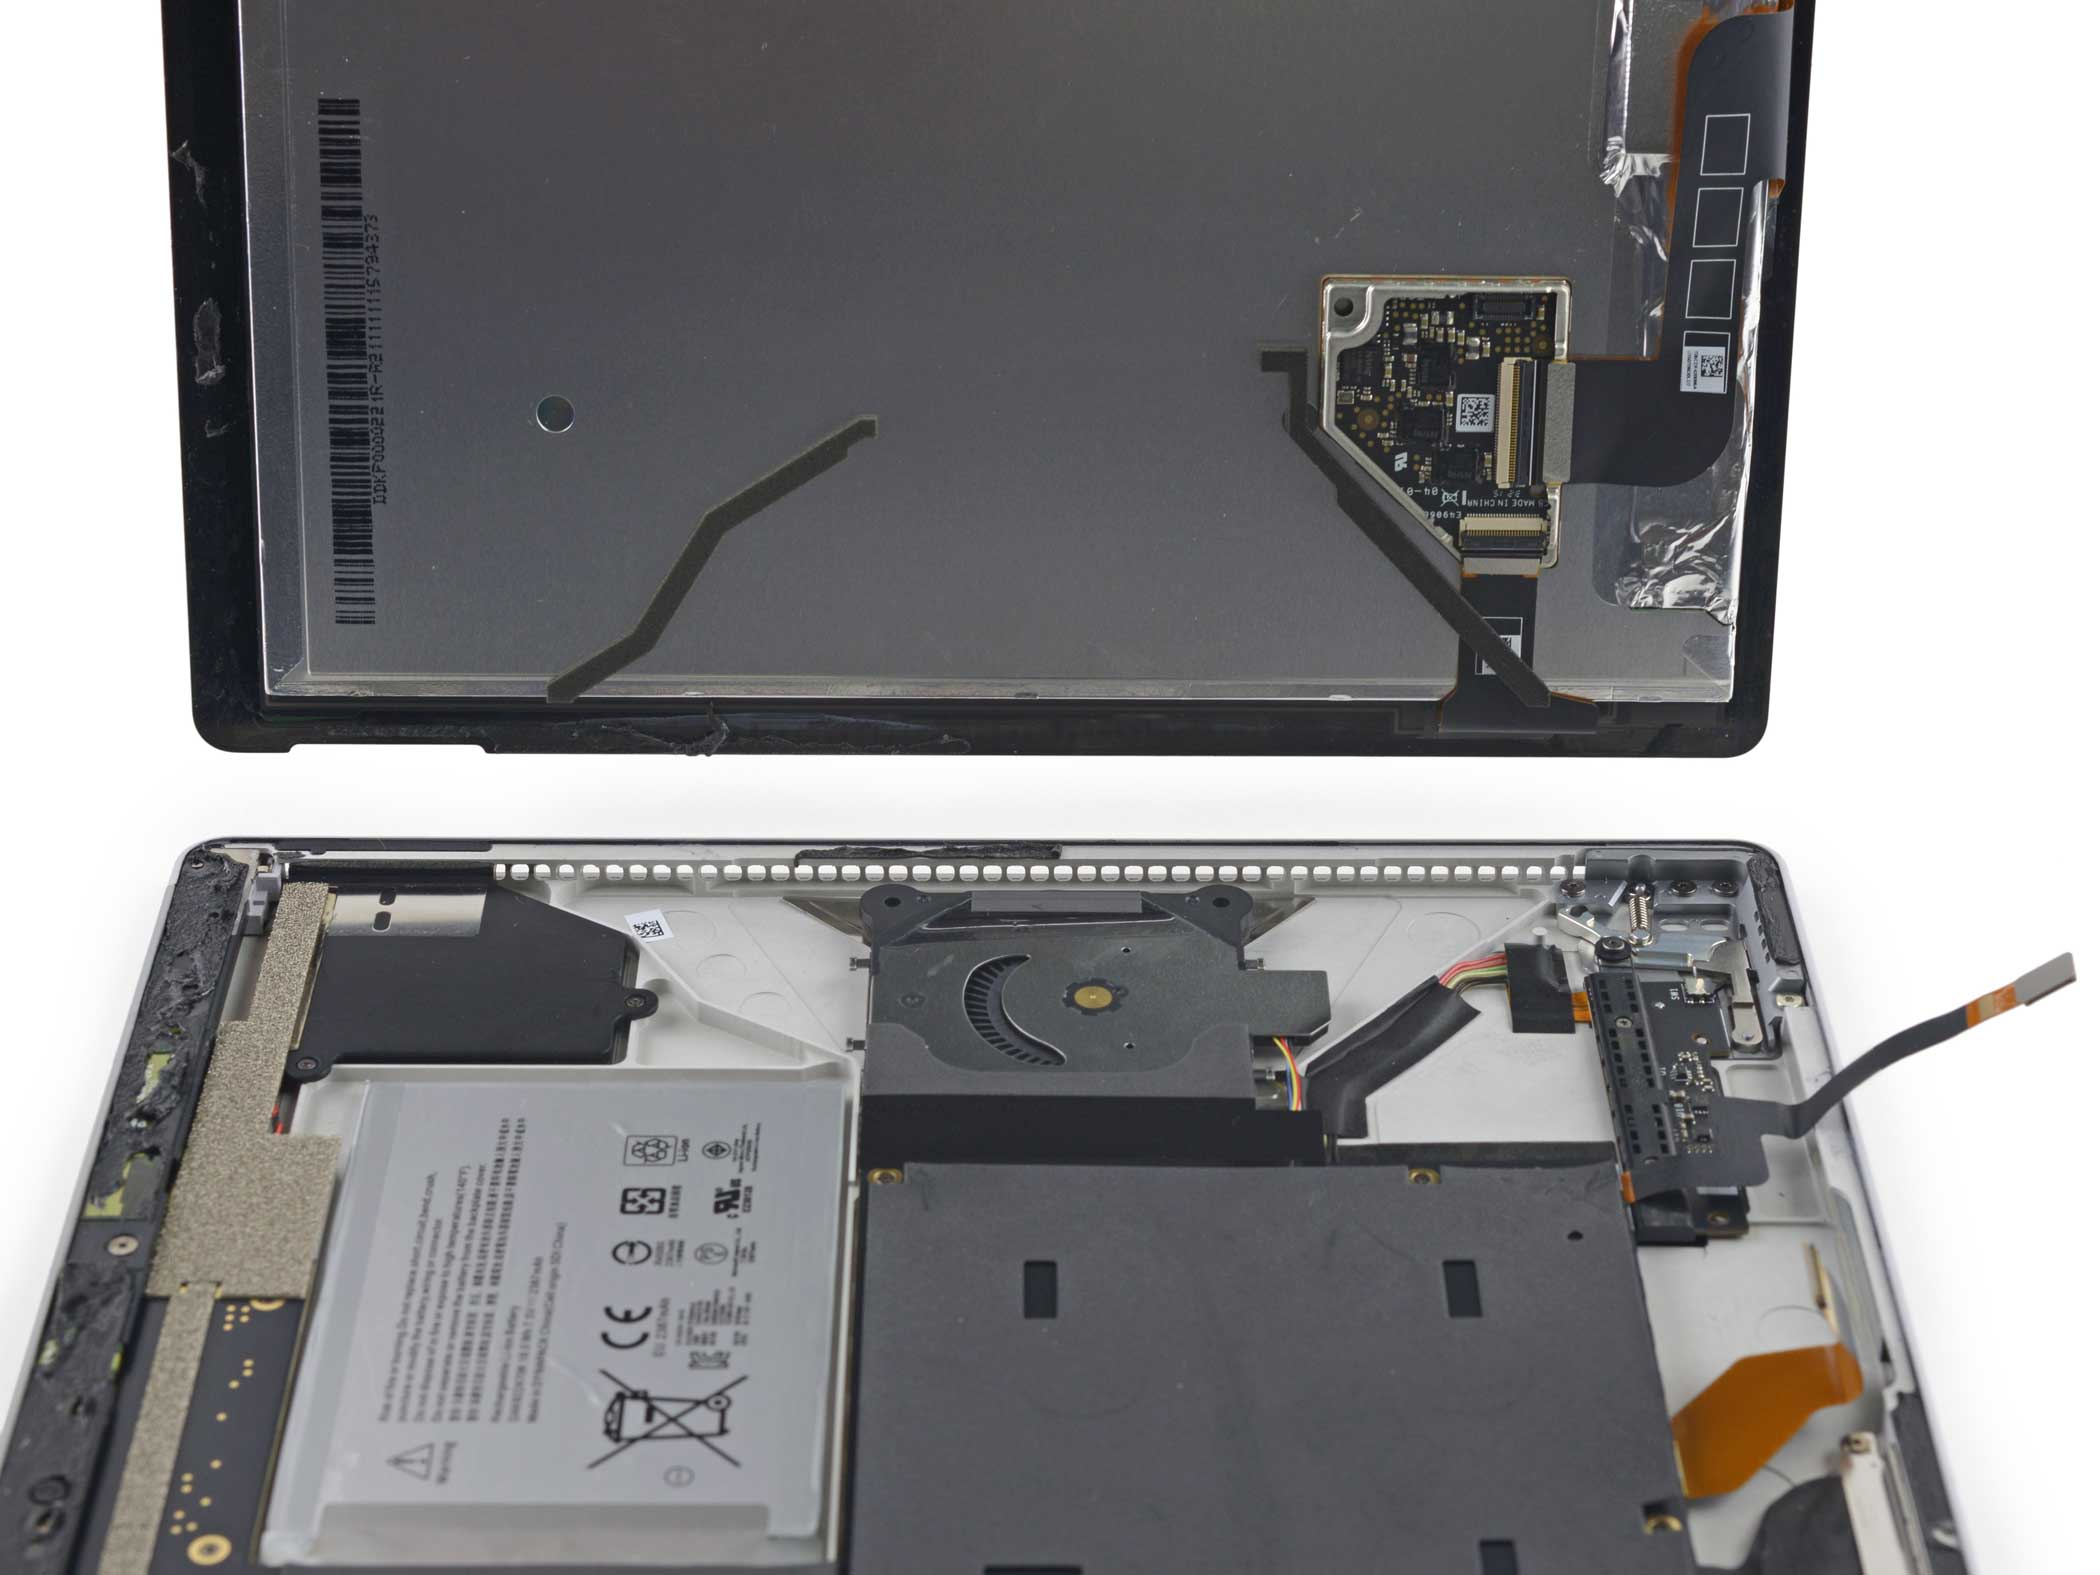 Cables connecting the Surface Book's display to the motherboard are detached.